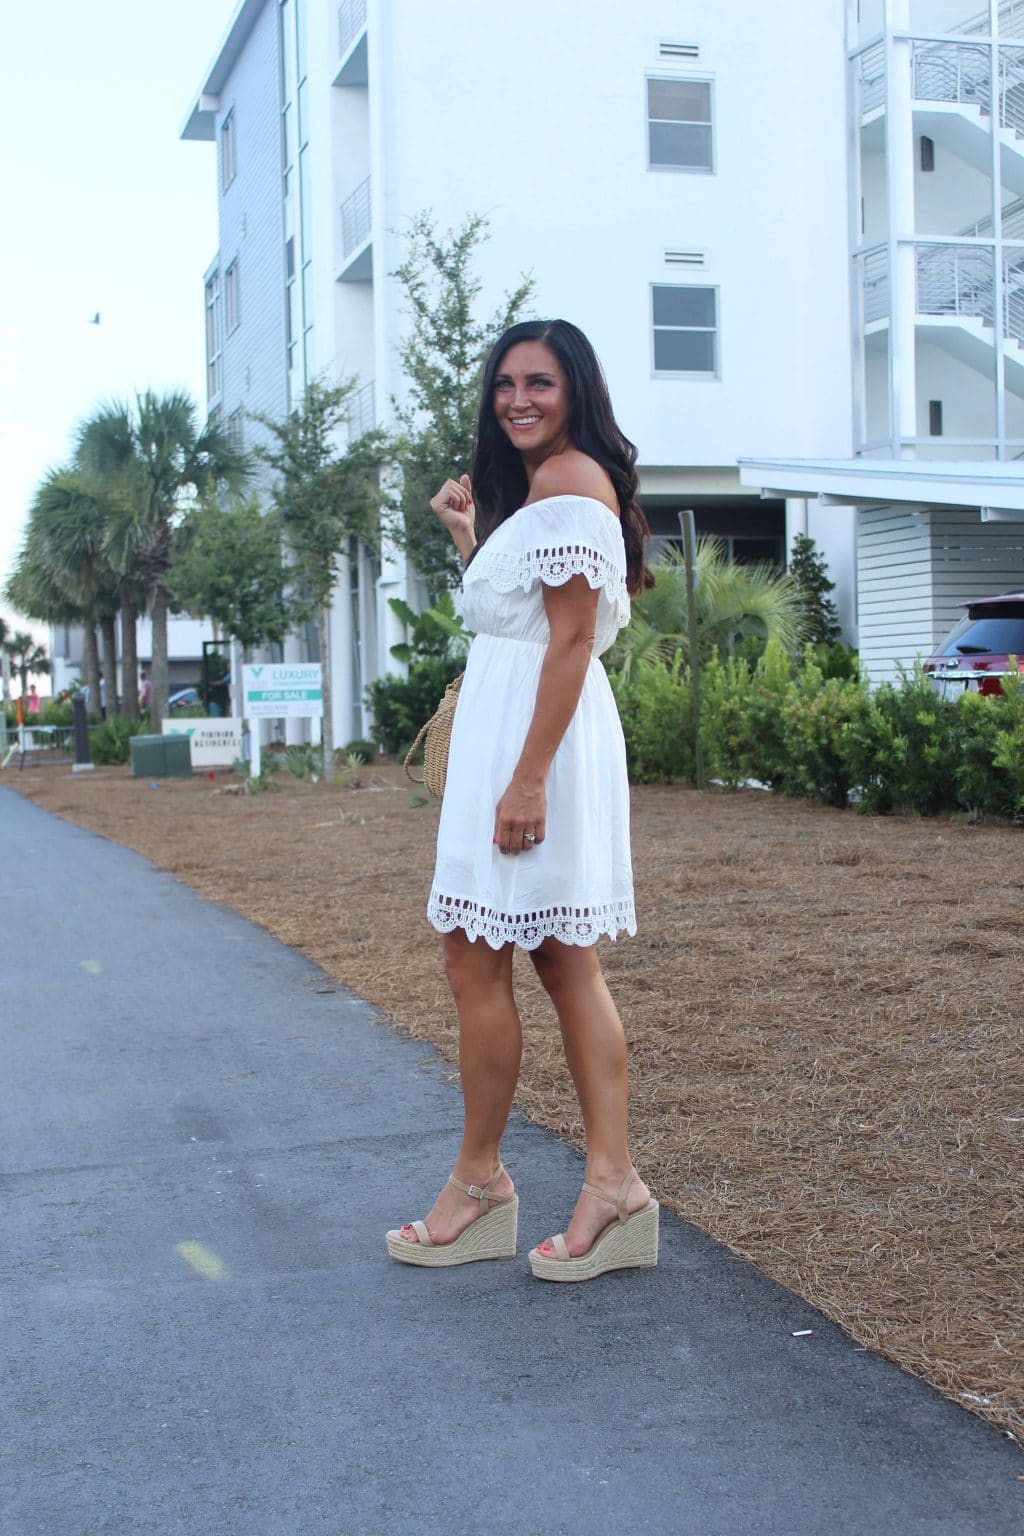 30A, Vacation restaurants, Date Night, Stilettos and Diapers, Molly Wey, White strapless dress